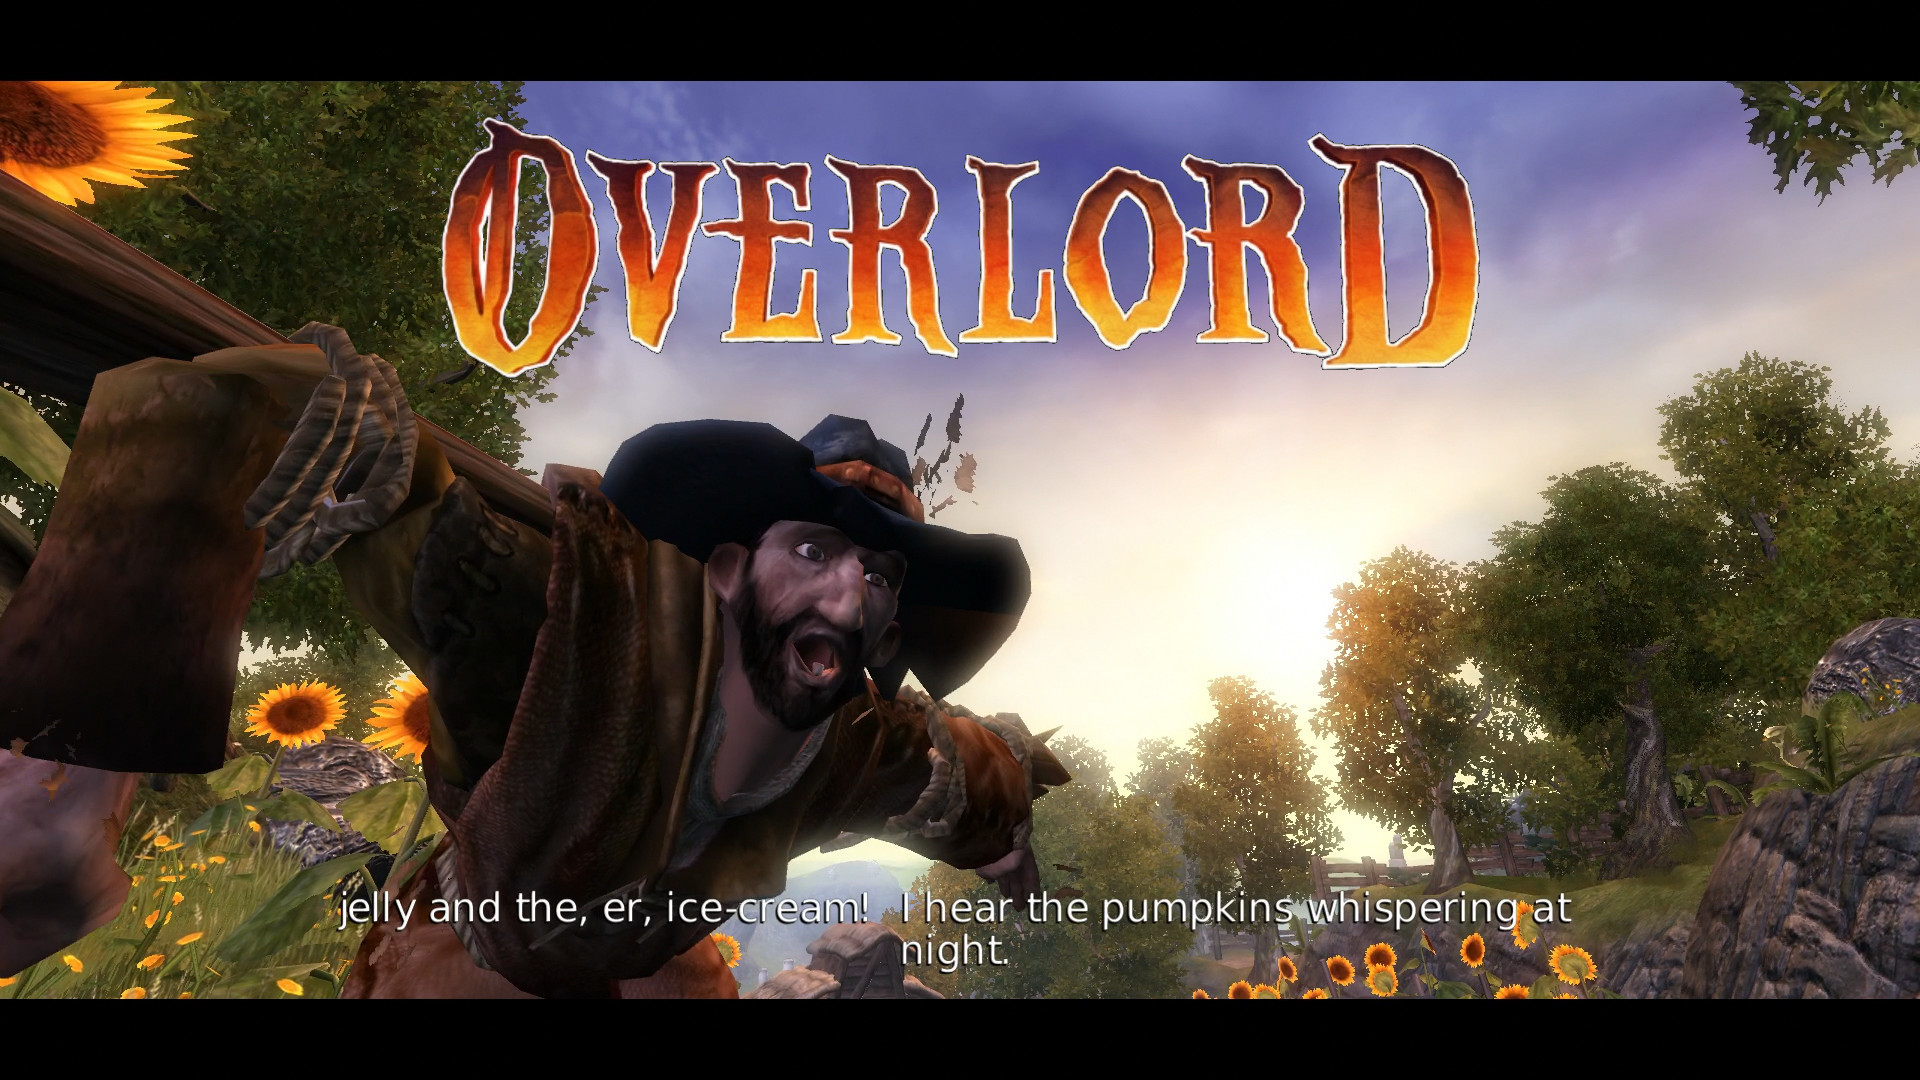 I Slept On This Game For 16 Years Because I Heard It Was An RTS – Let’s Play Overlord Part 1